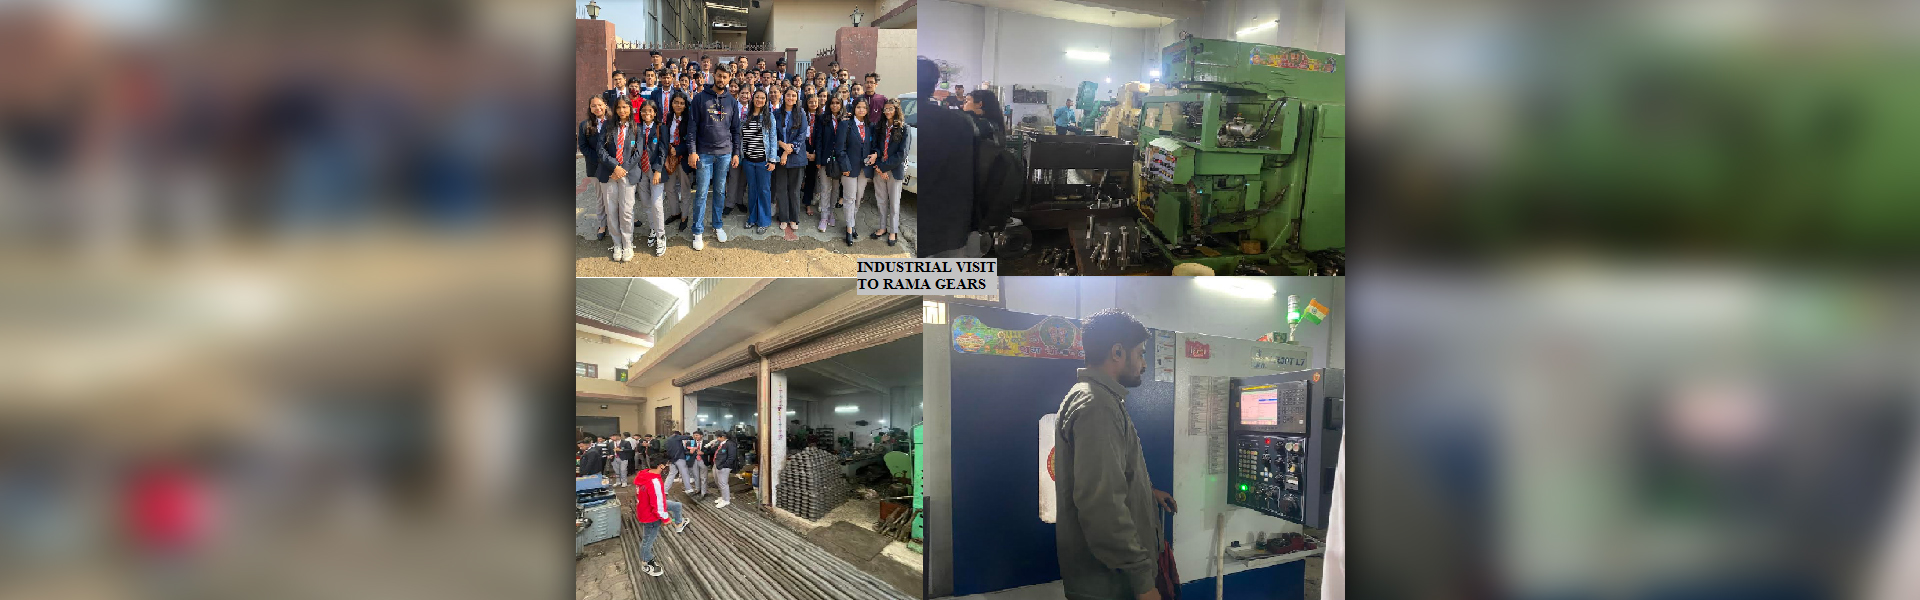 INDUSTRIAL VISIT TO RAMA GEARS 30th NOVEMBER,2022 